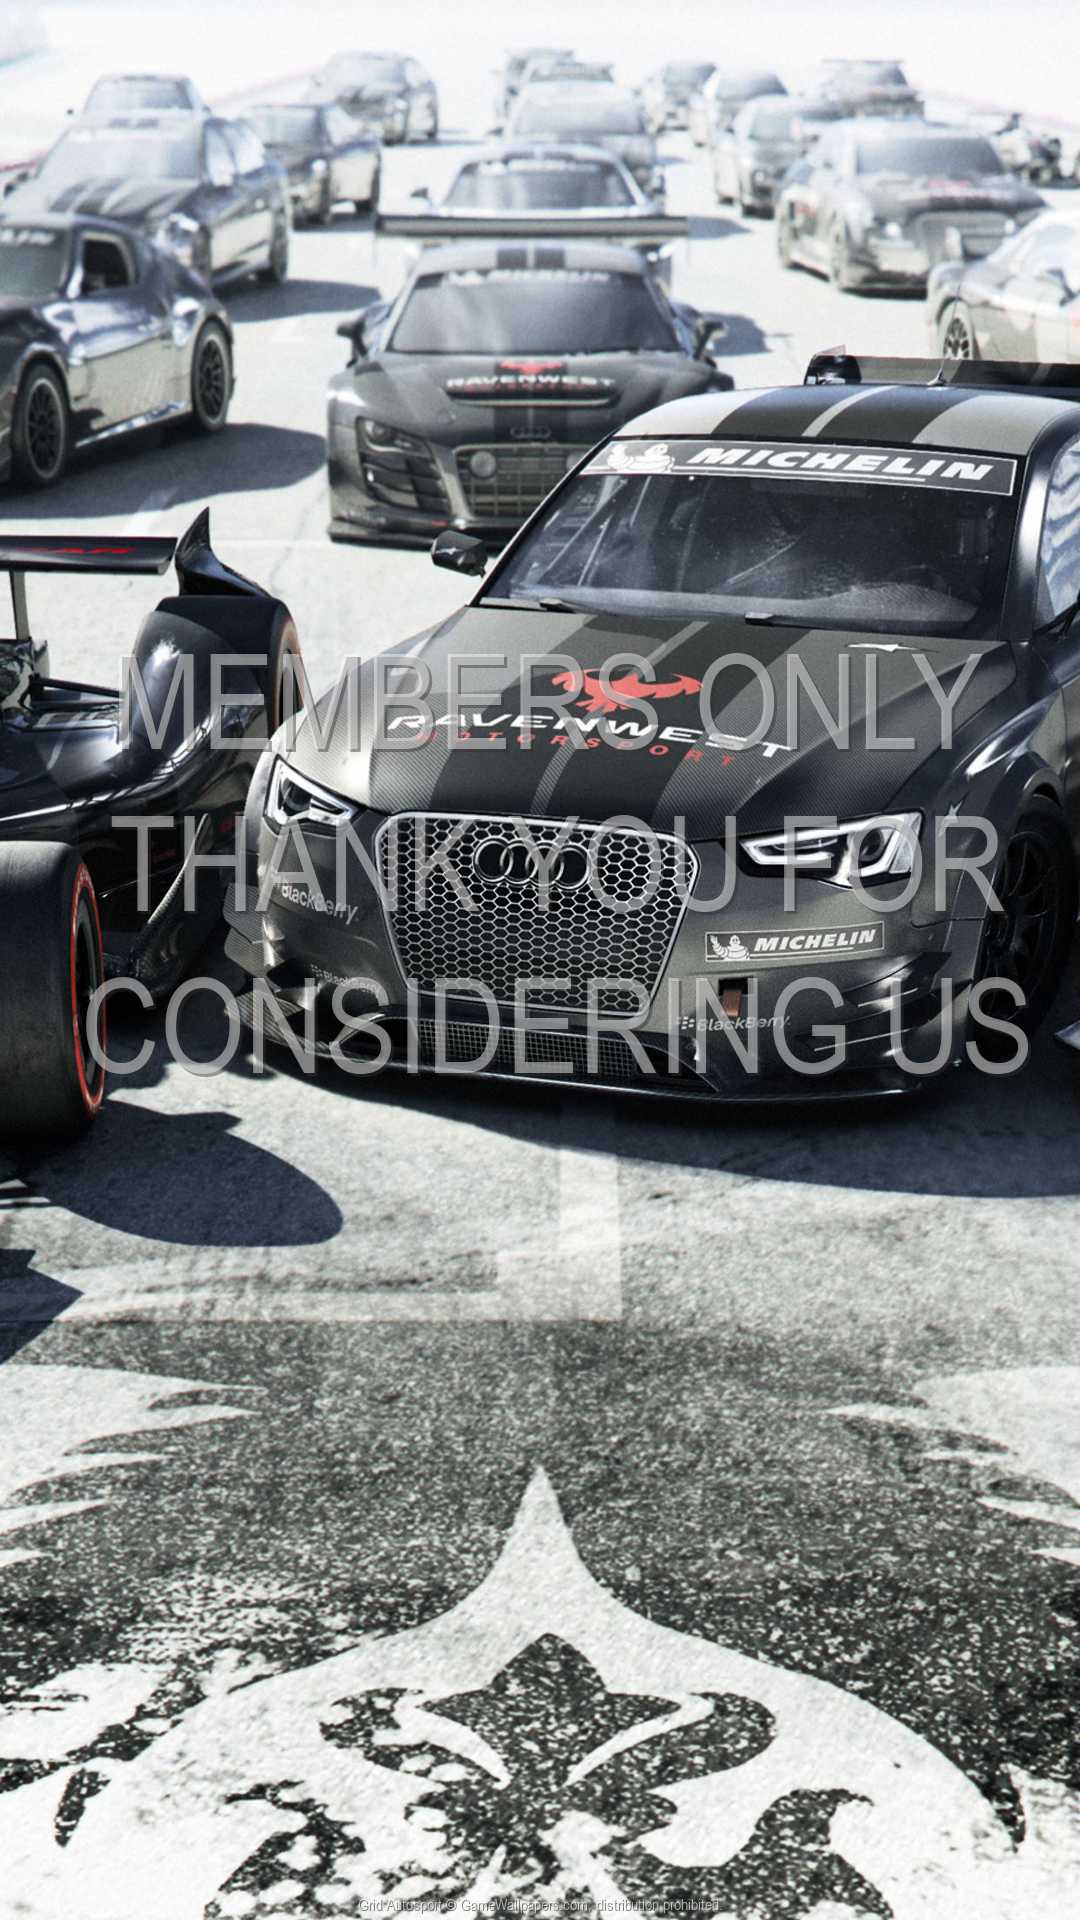 Grid Autosport 1080p Vertical Mobile wallpaper or background 02